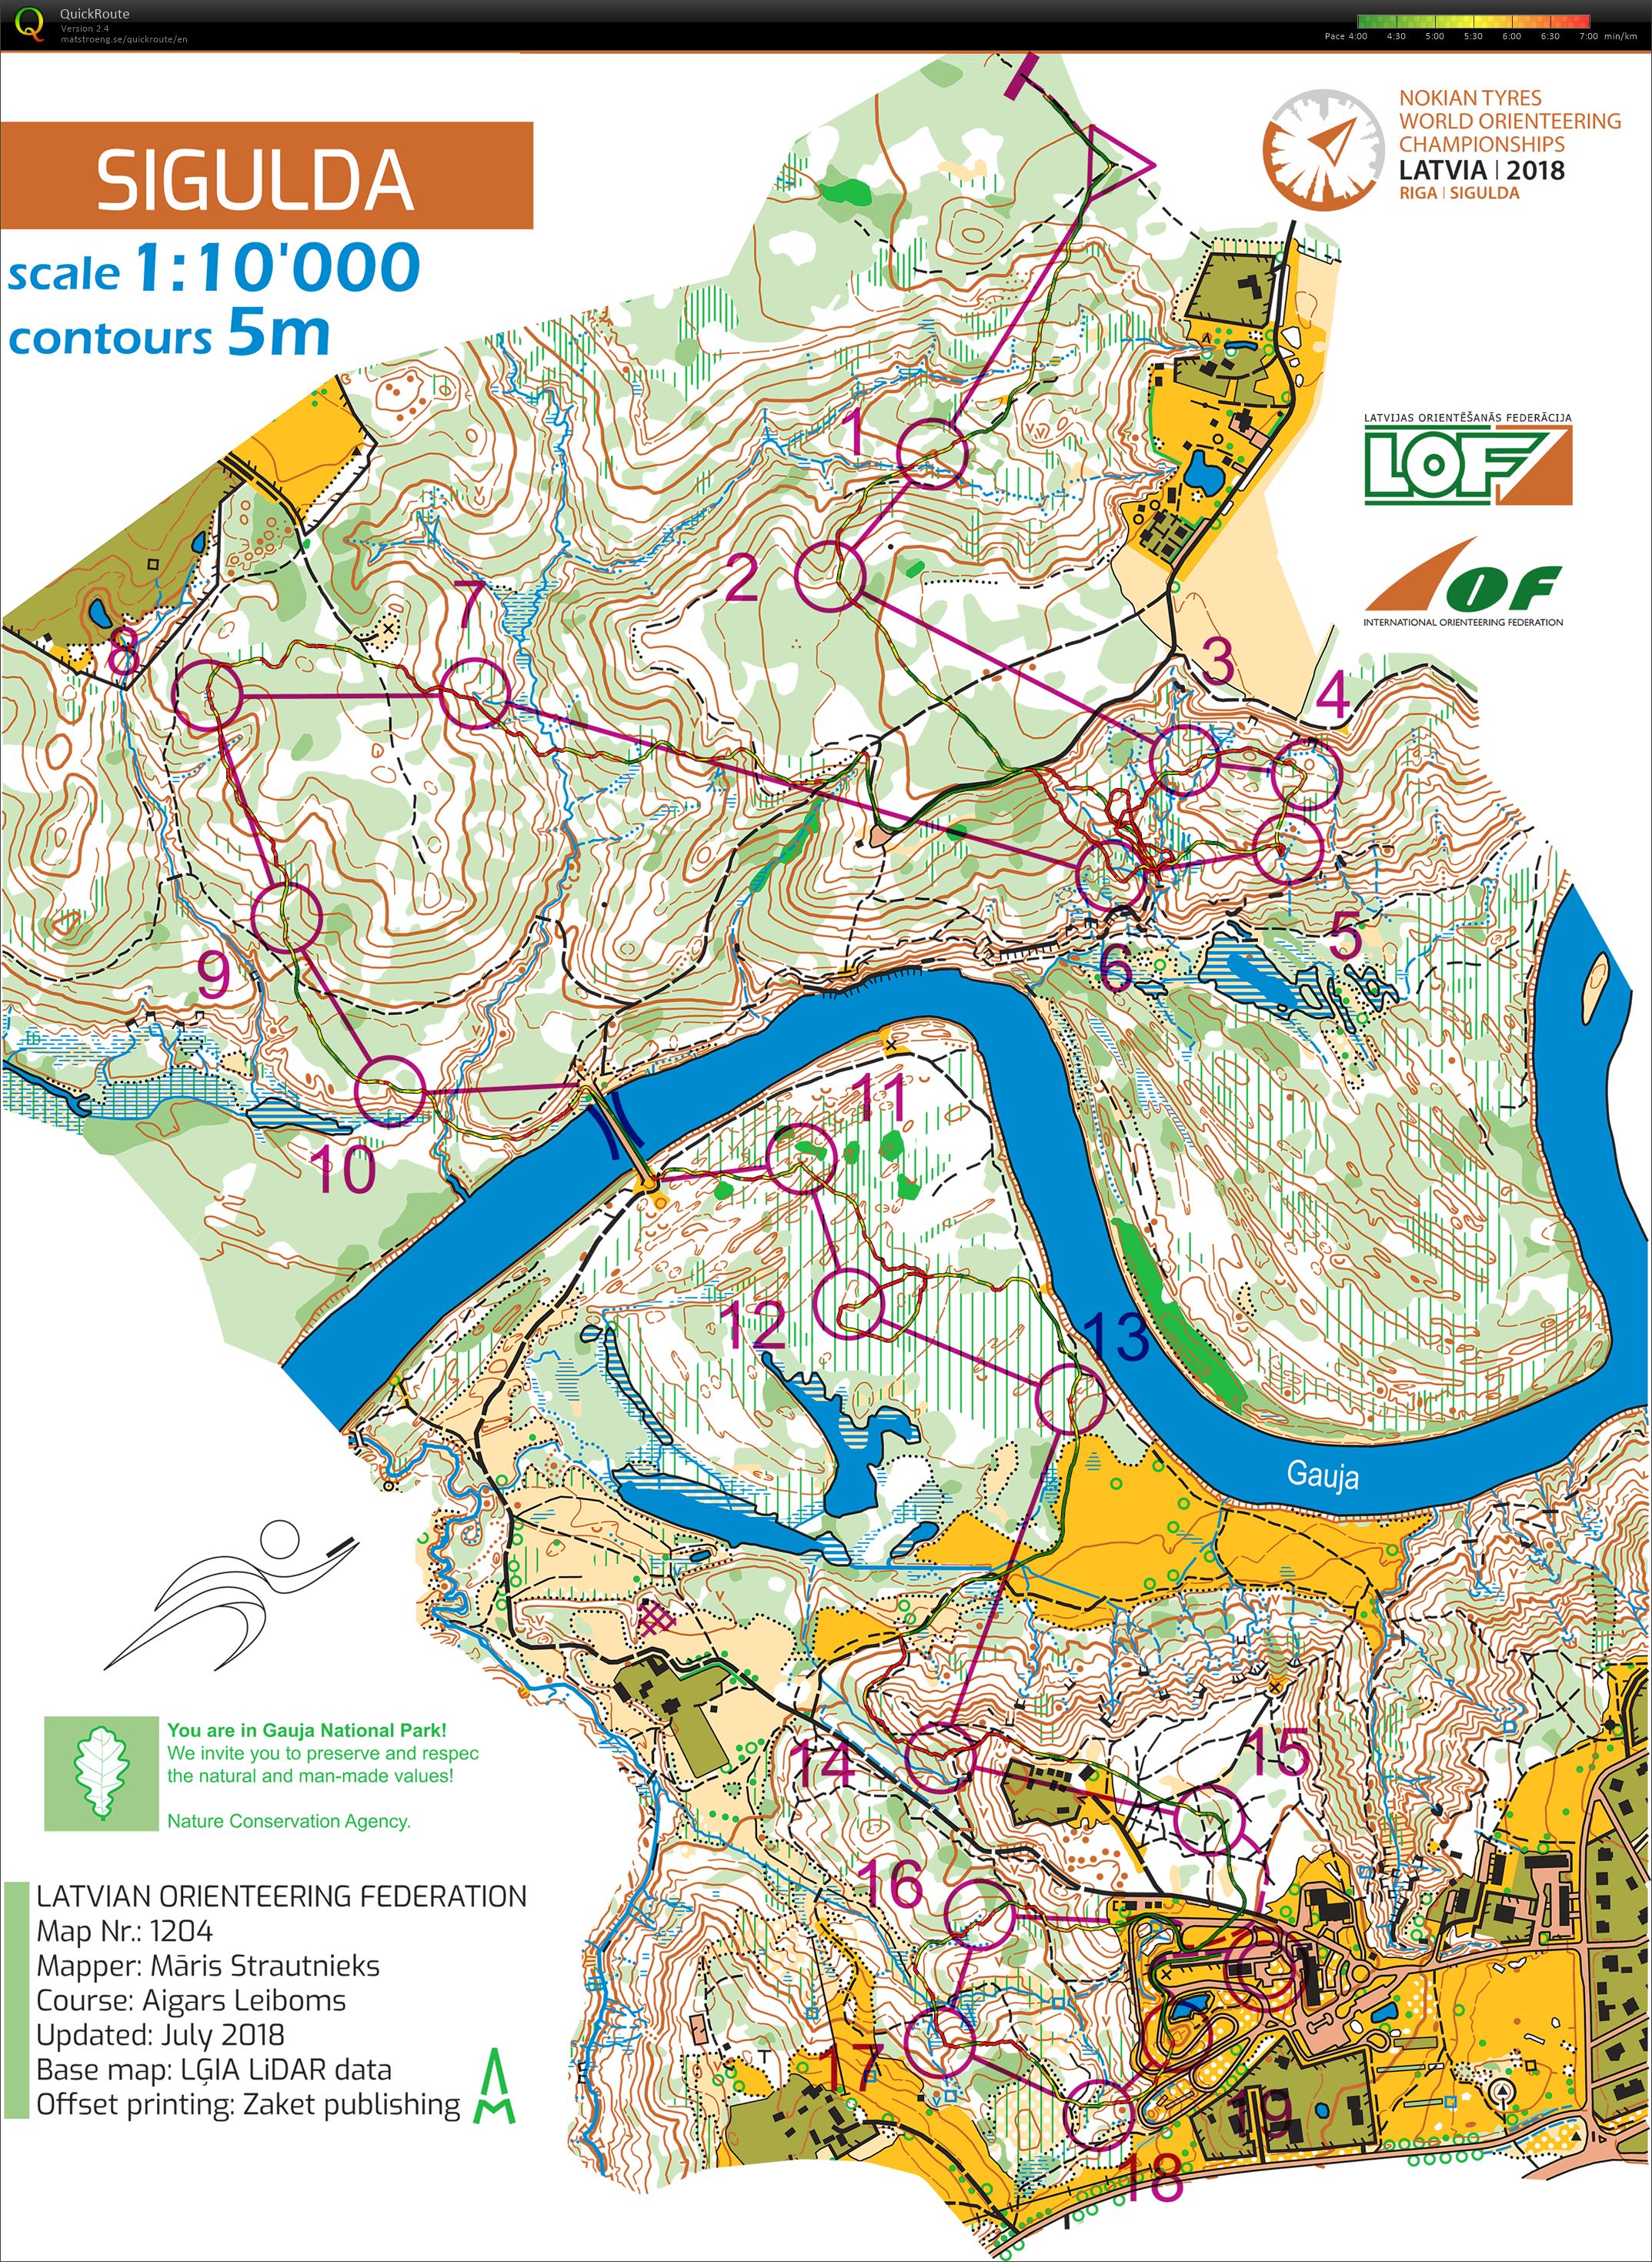 WOC 2018 Middle (07.08.2018)